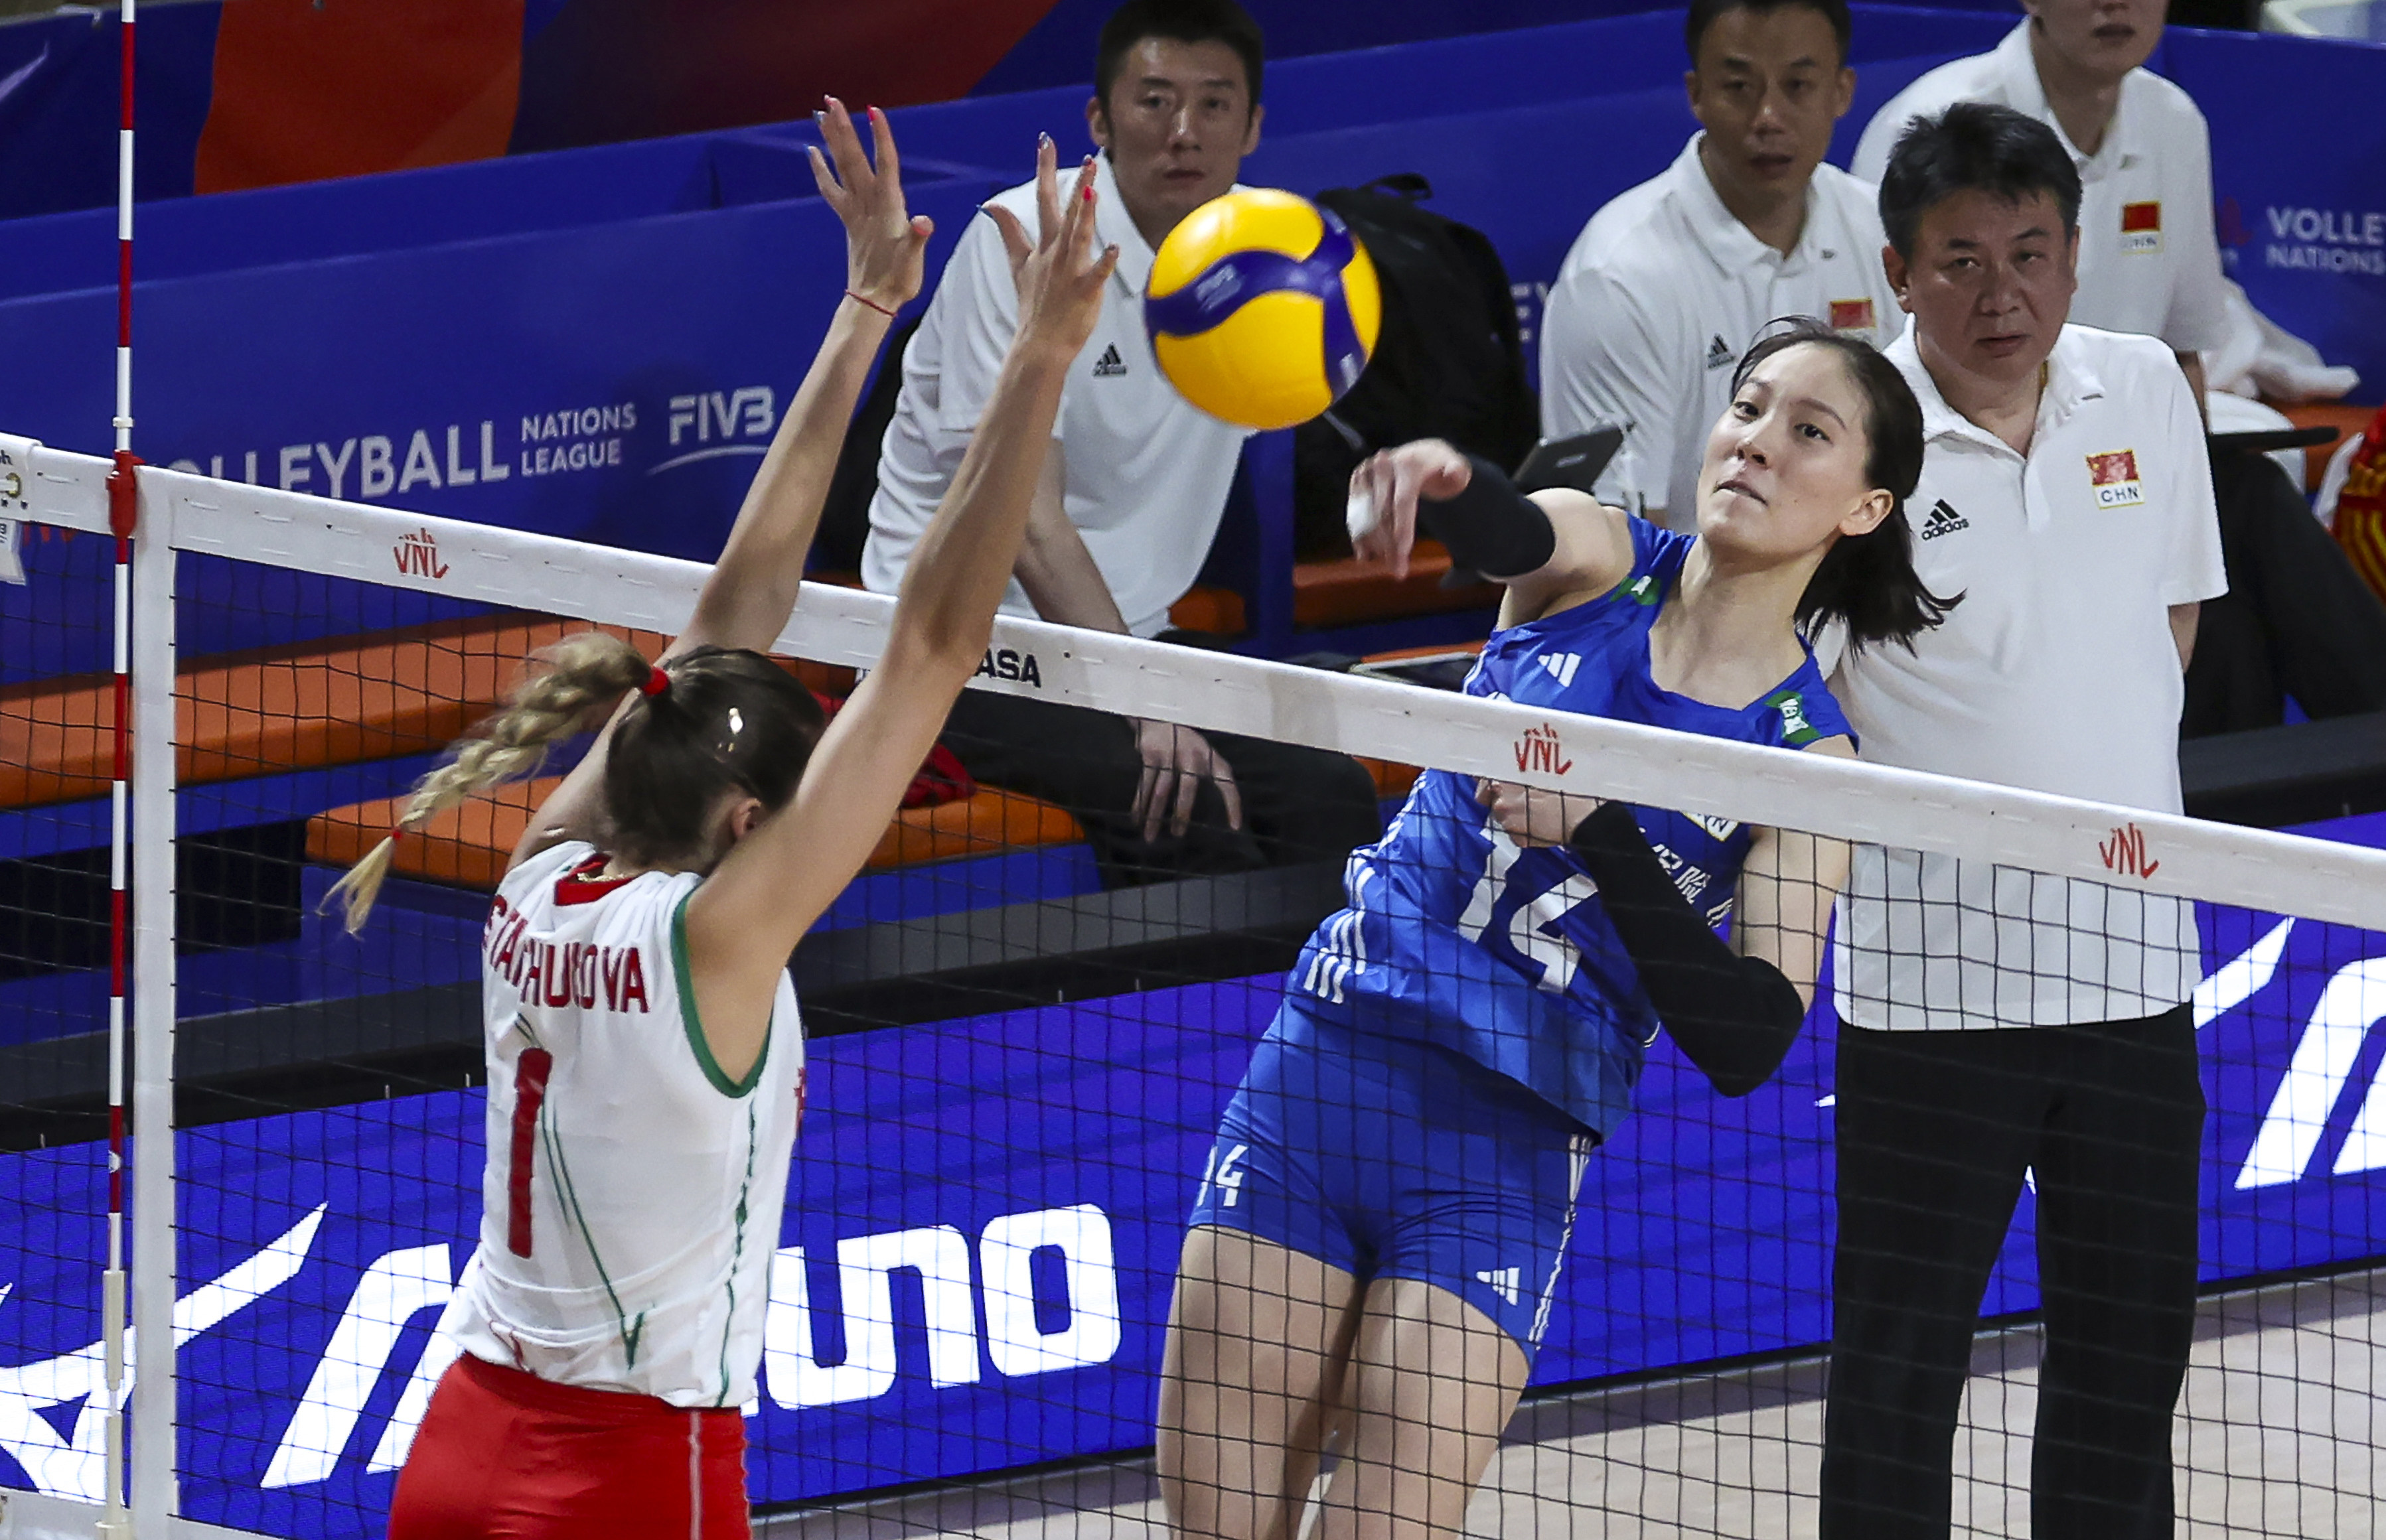 Zheng Yixin of China spikes the ball during the FIVB Women’s Volleyball Nations League game against Bulgaria at the Coliseum in Hung Hom. Photo: Yik Yeung-man